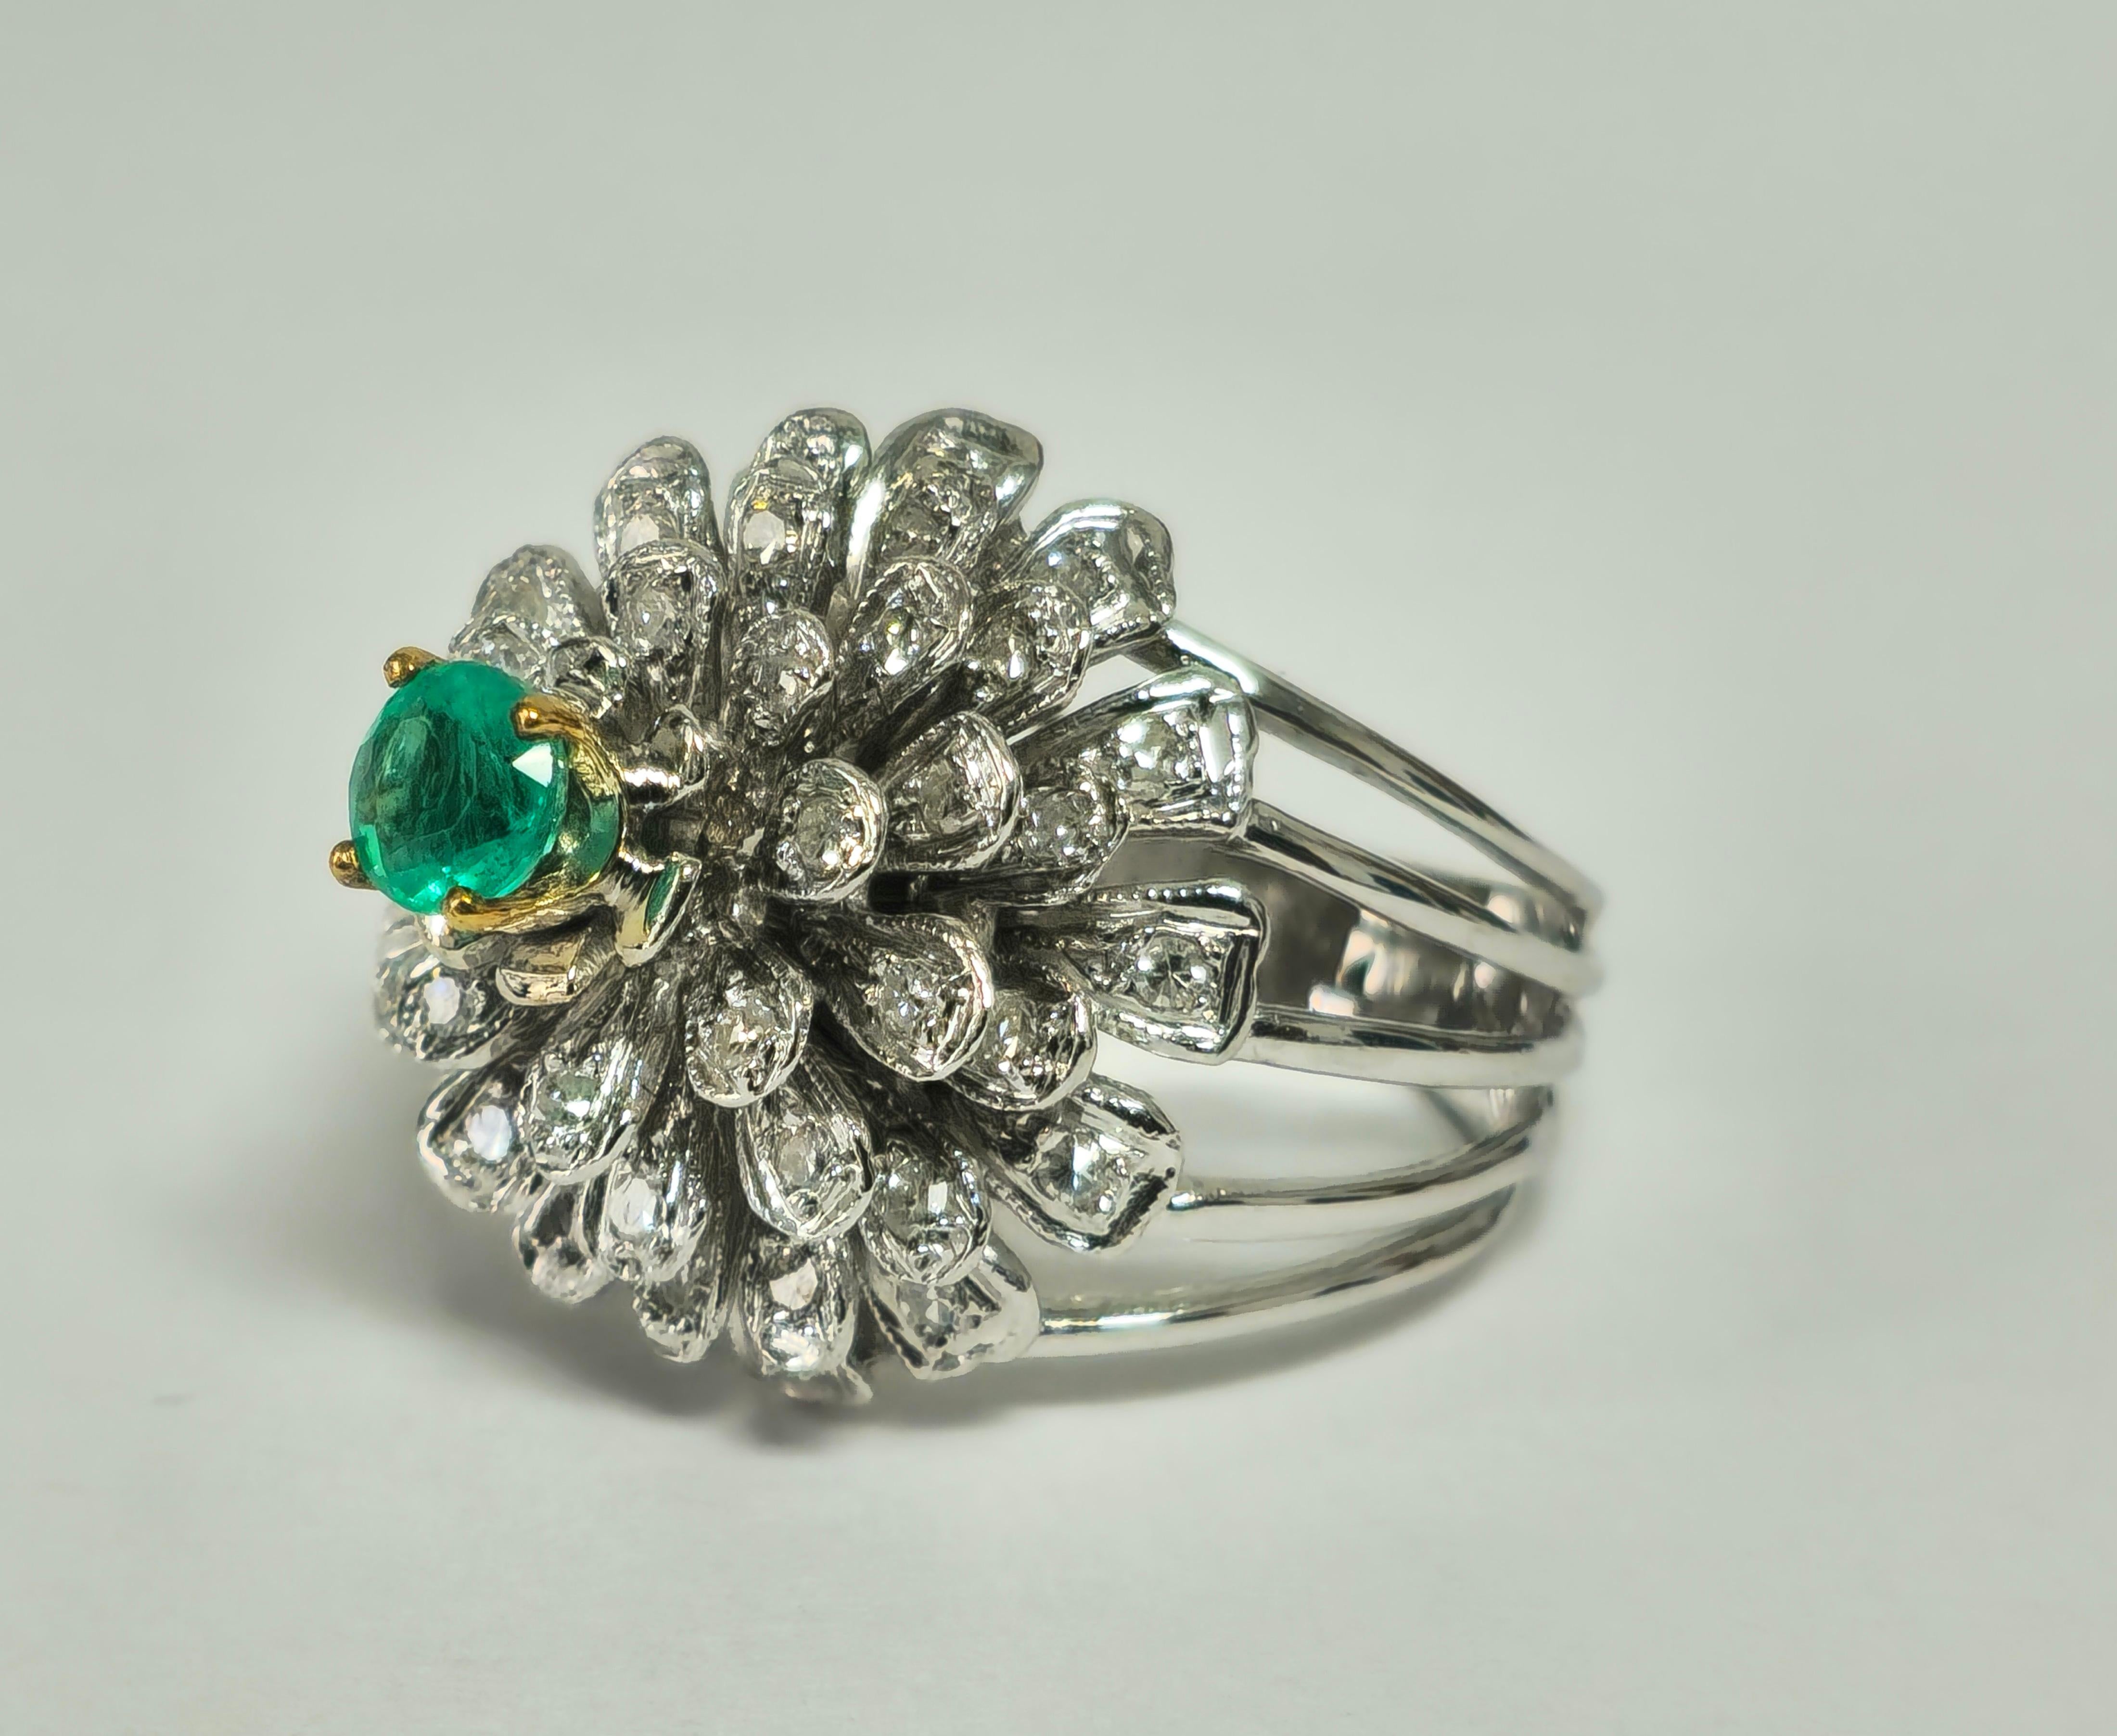 At its heart lies a mesmerizing Colombian emerald, symbolizing growth and prosperity, surrounded by a halo of side diamonds, each boasting impeccable clarity and color. This ring's exquisite flower and blooming design is more than just jewelry; it's